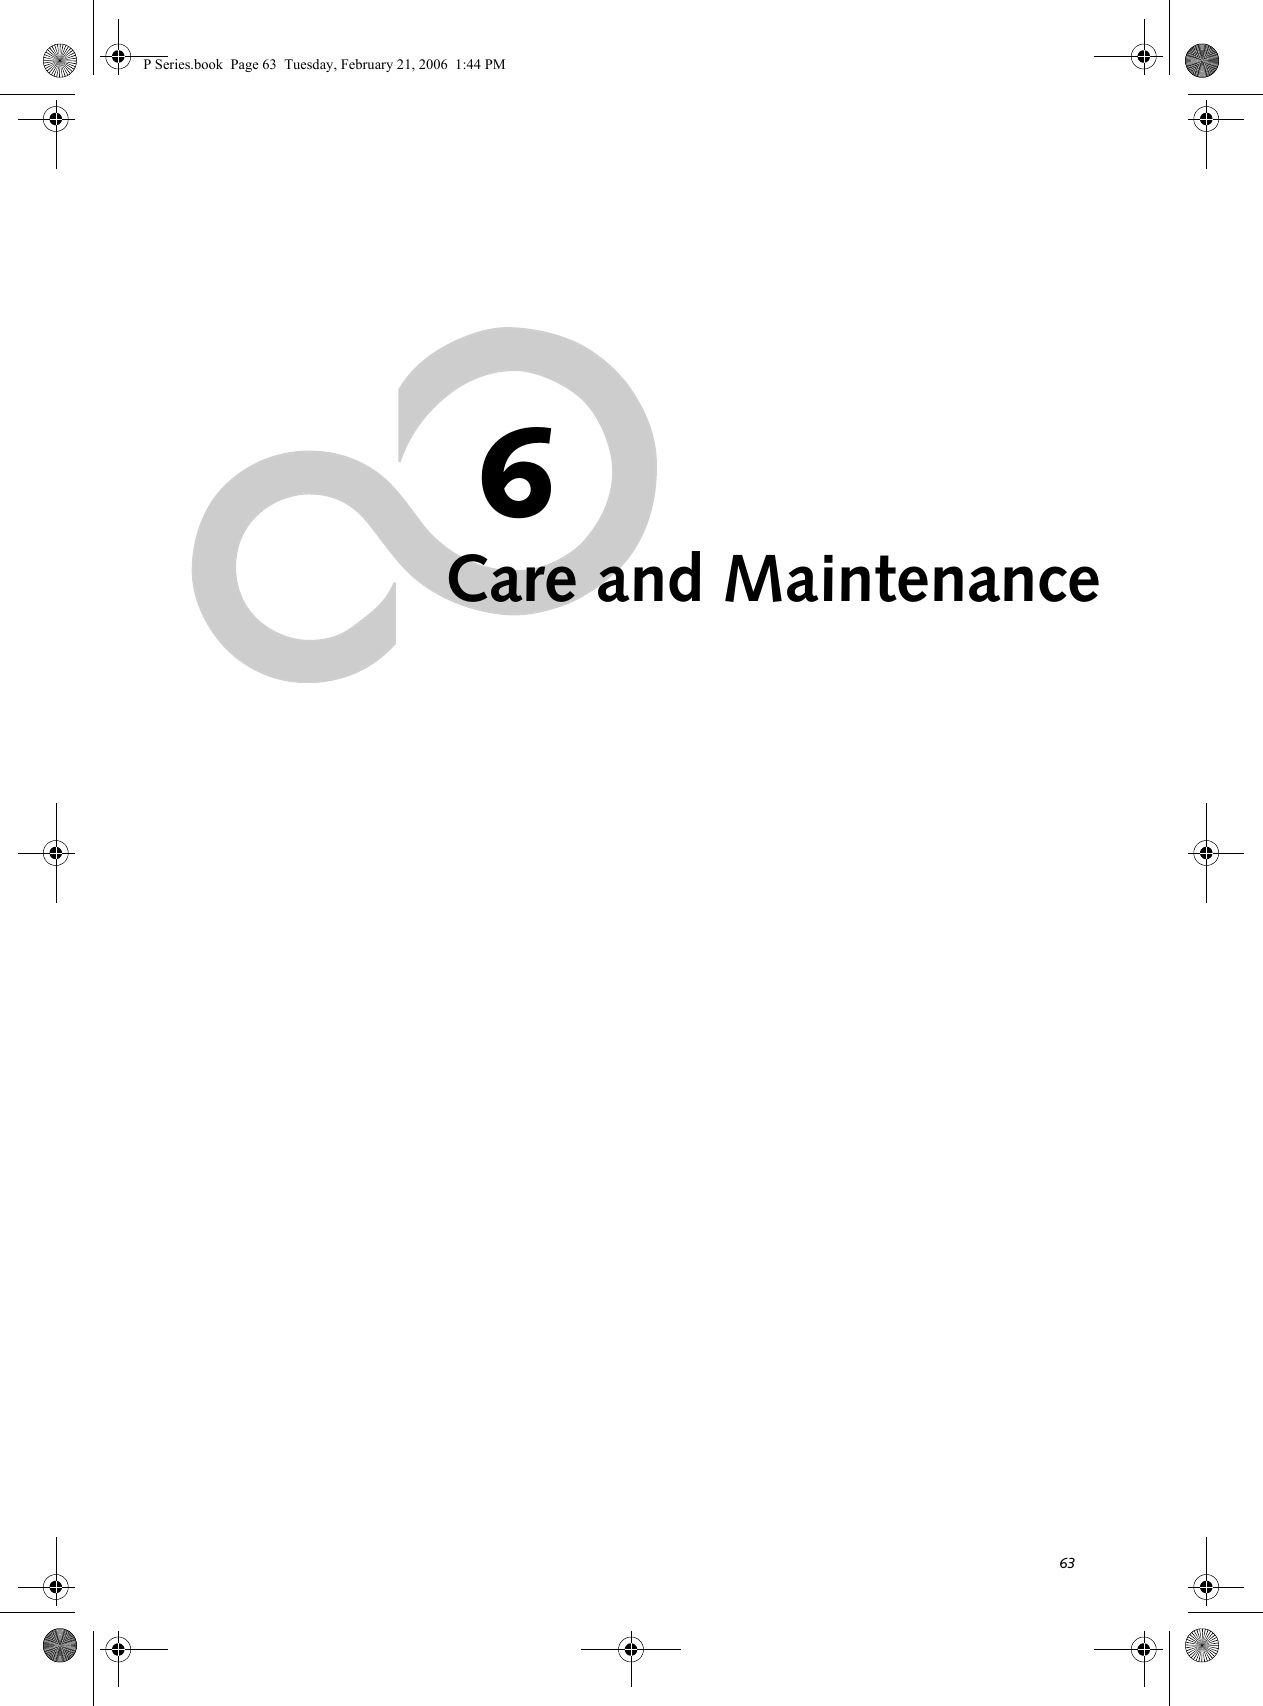 636Care and MaintenanceP Series.book  Page 63  Tuesday, February 21, 2006  1:44 PM